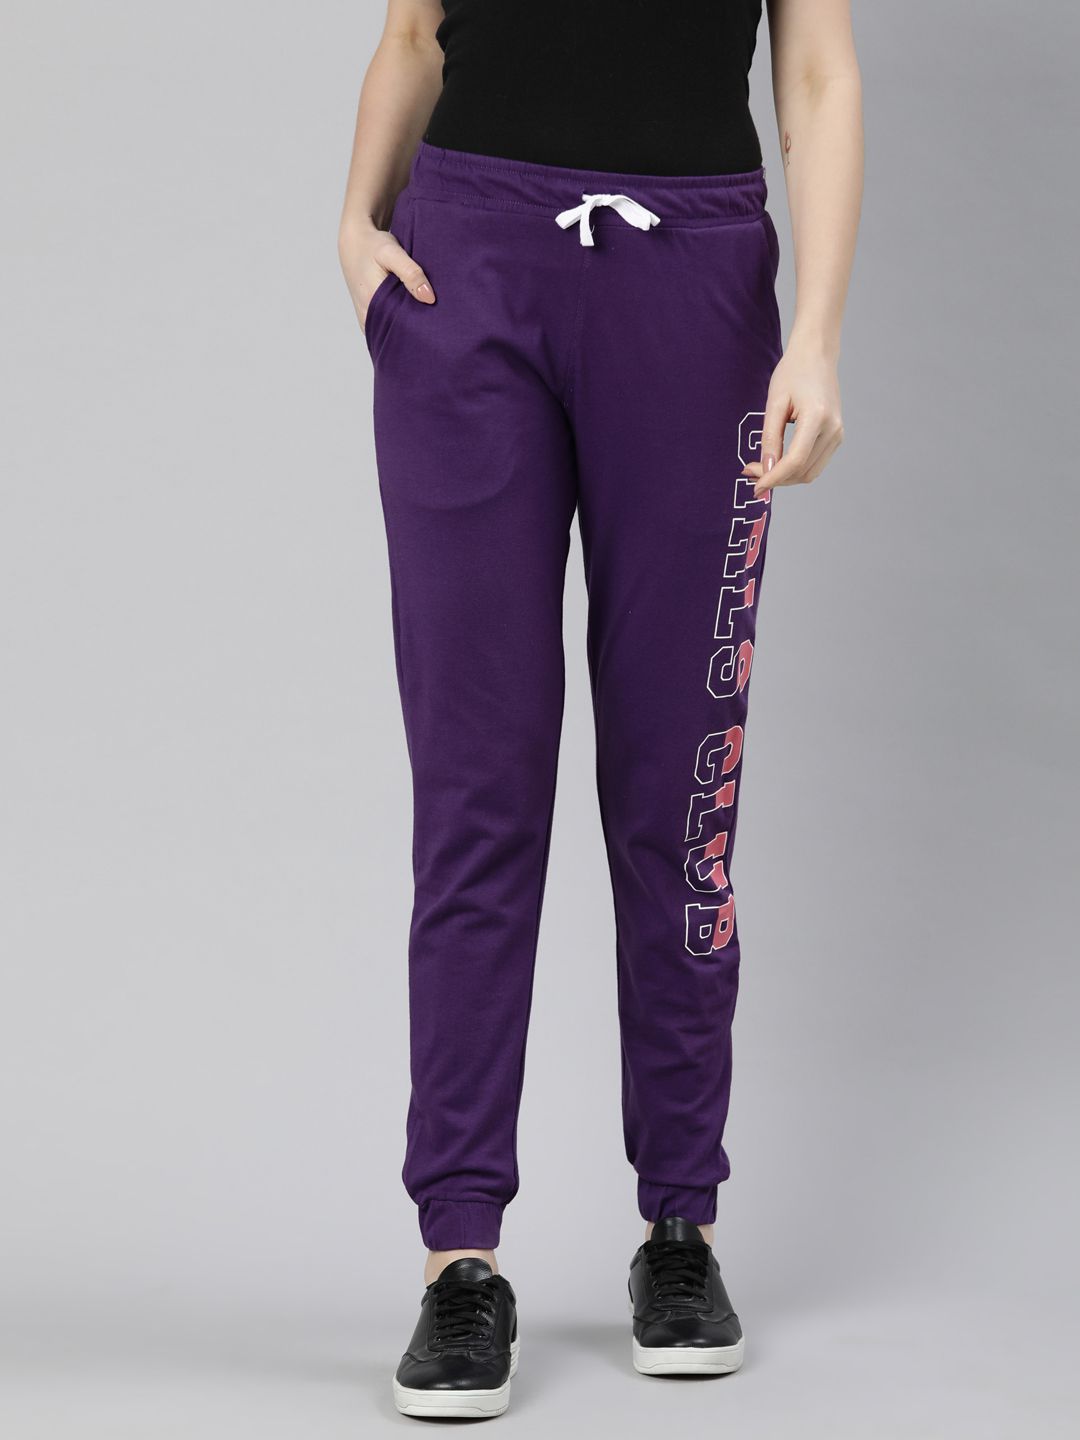     			Dixcy Slimz Purple Cotton Women's Running Joggers ( Pack of 1 )